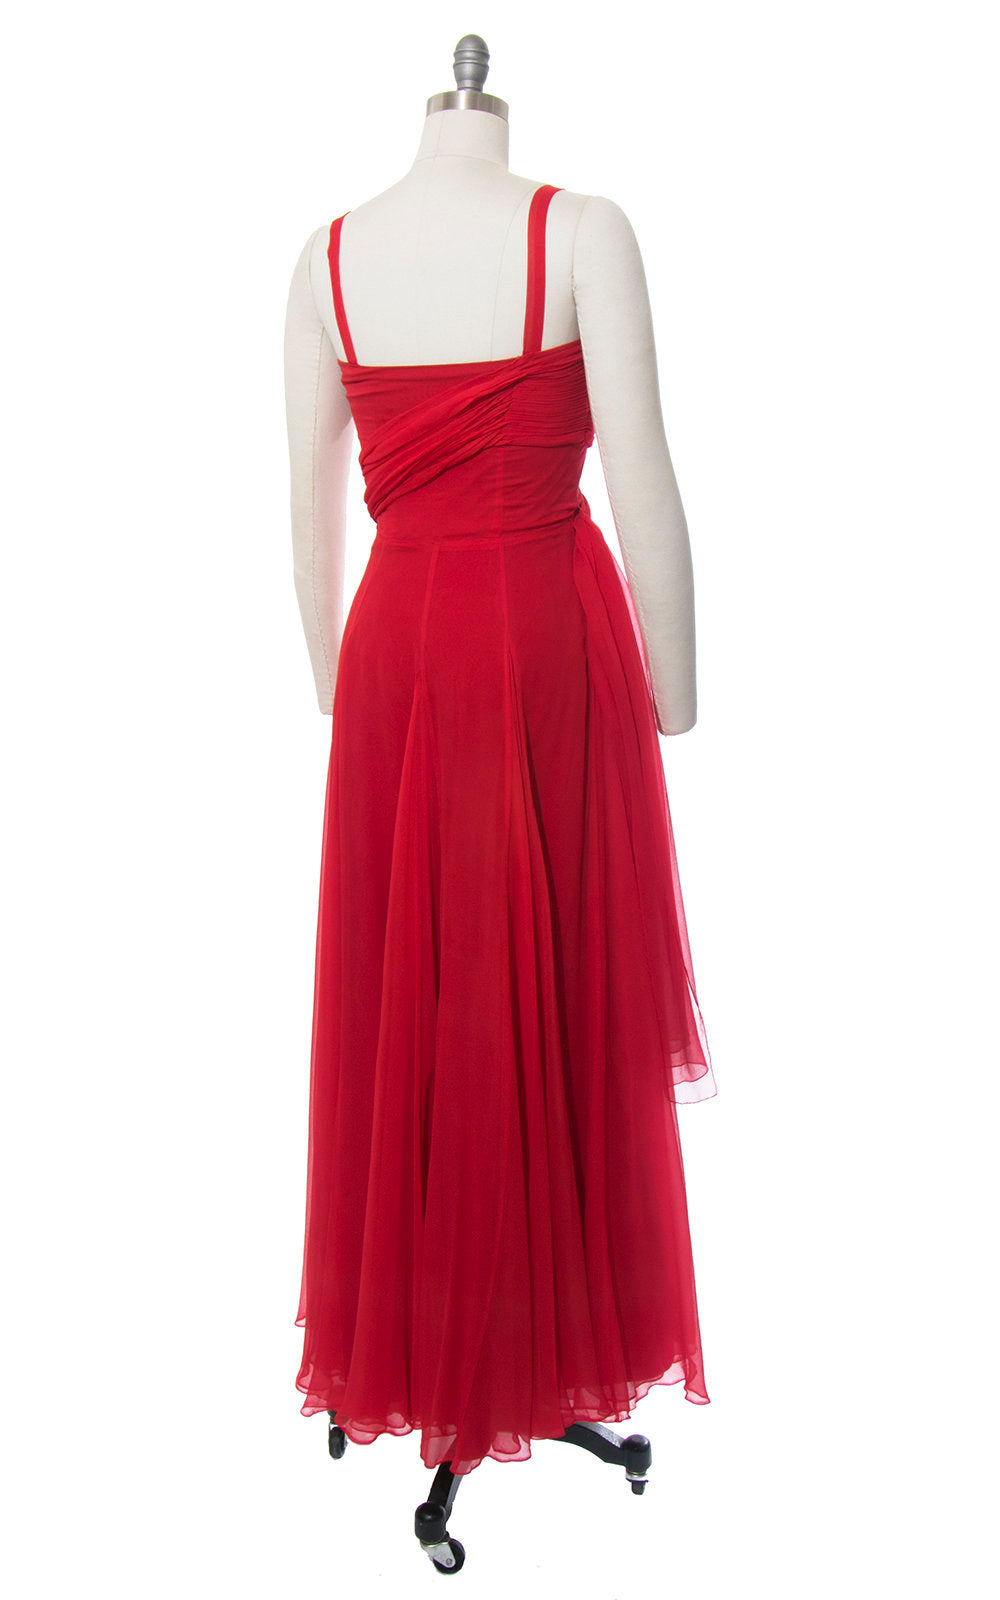 Vintage 1950s Dress | 50s Red Silk Chiffon Pleated Party Dress Full Length Holiday Evening Gown with Waterfall Sash (small)